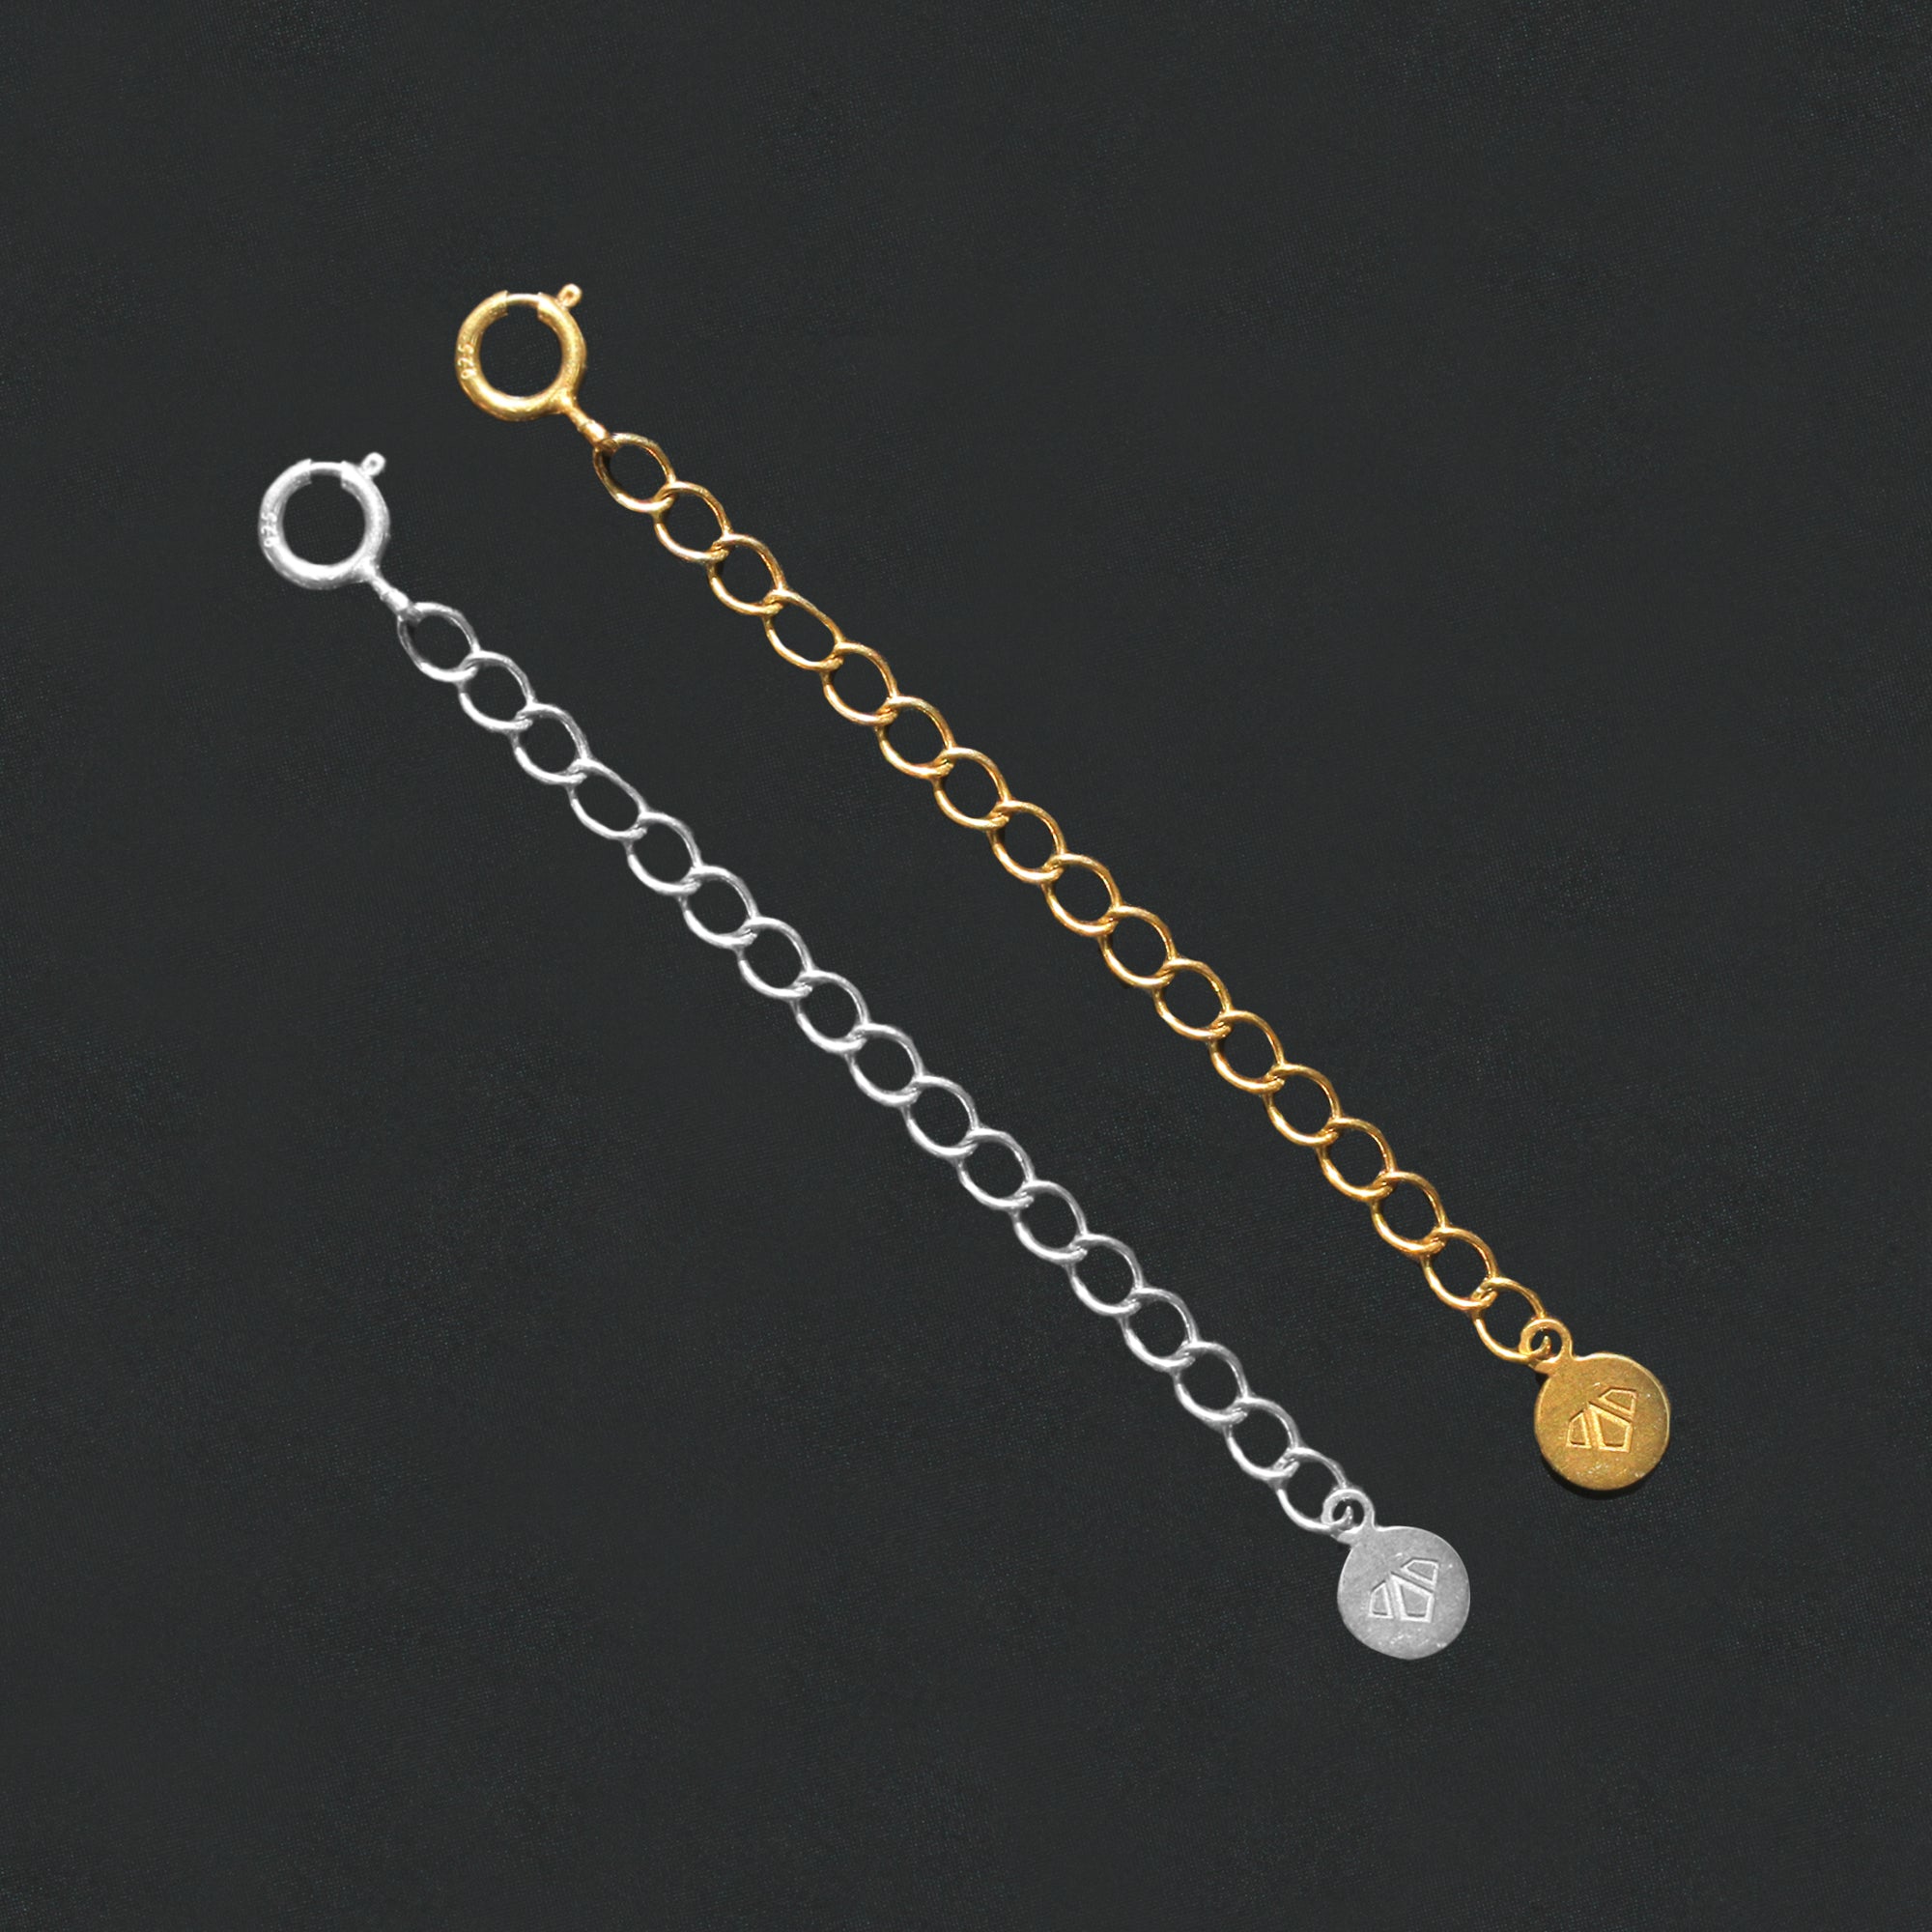 Buy Two 3 Necklace Extenders (Gold and Silver) Online at